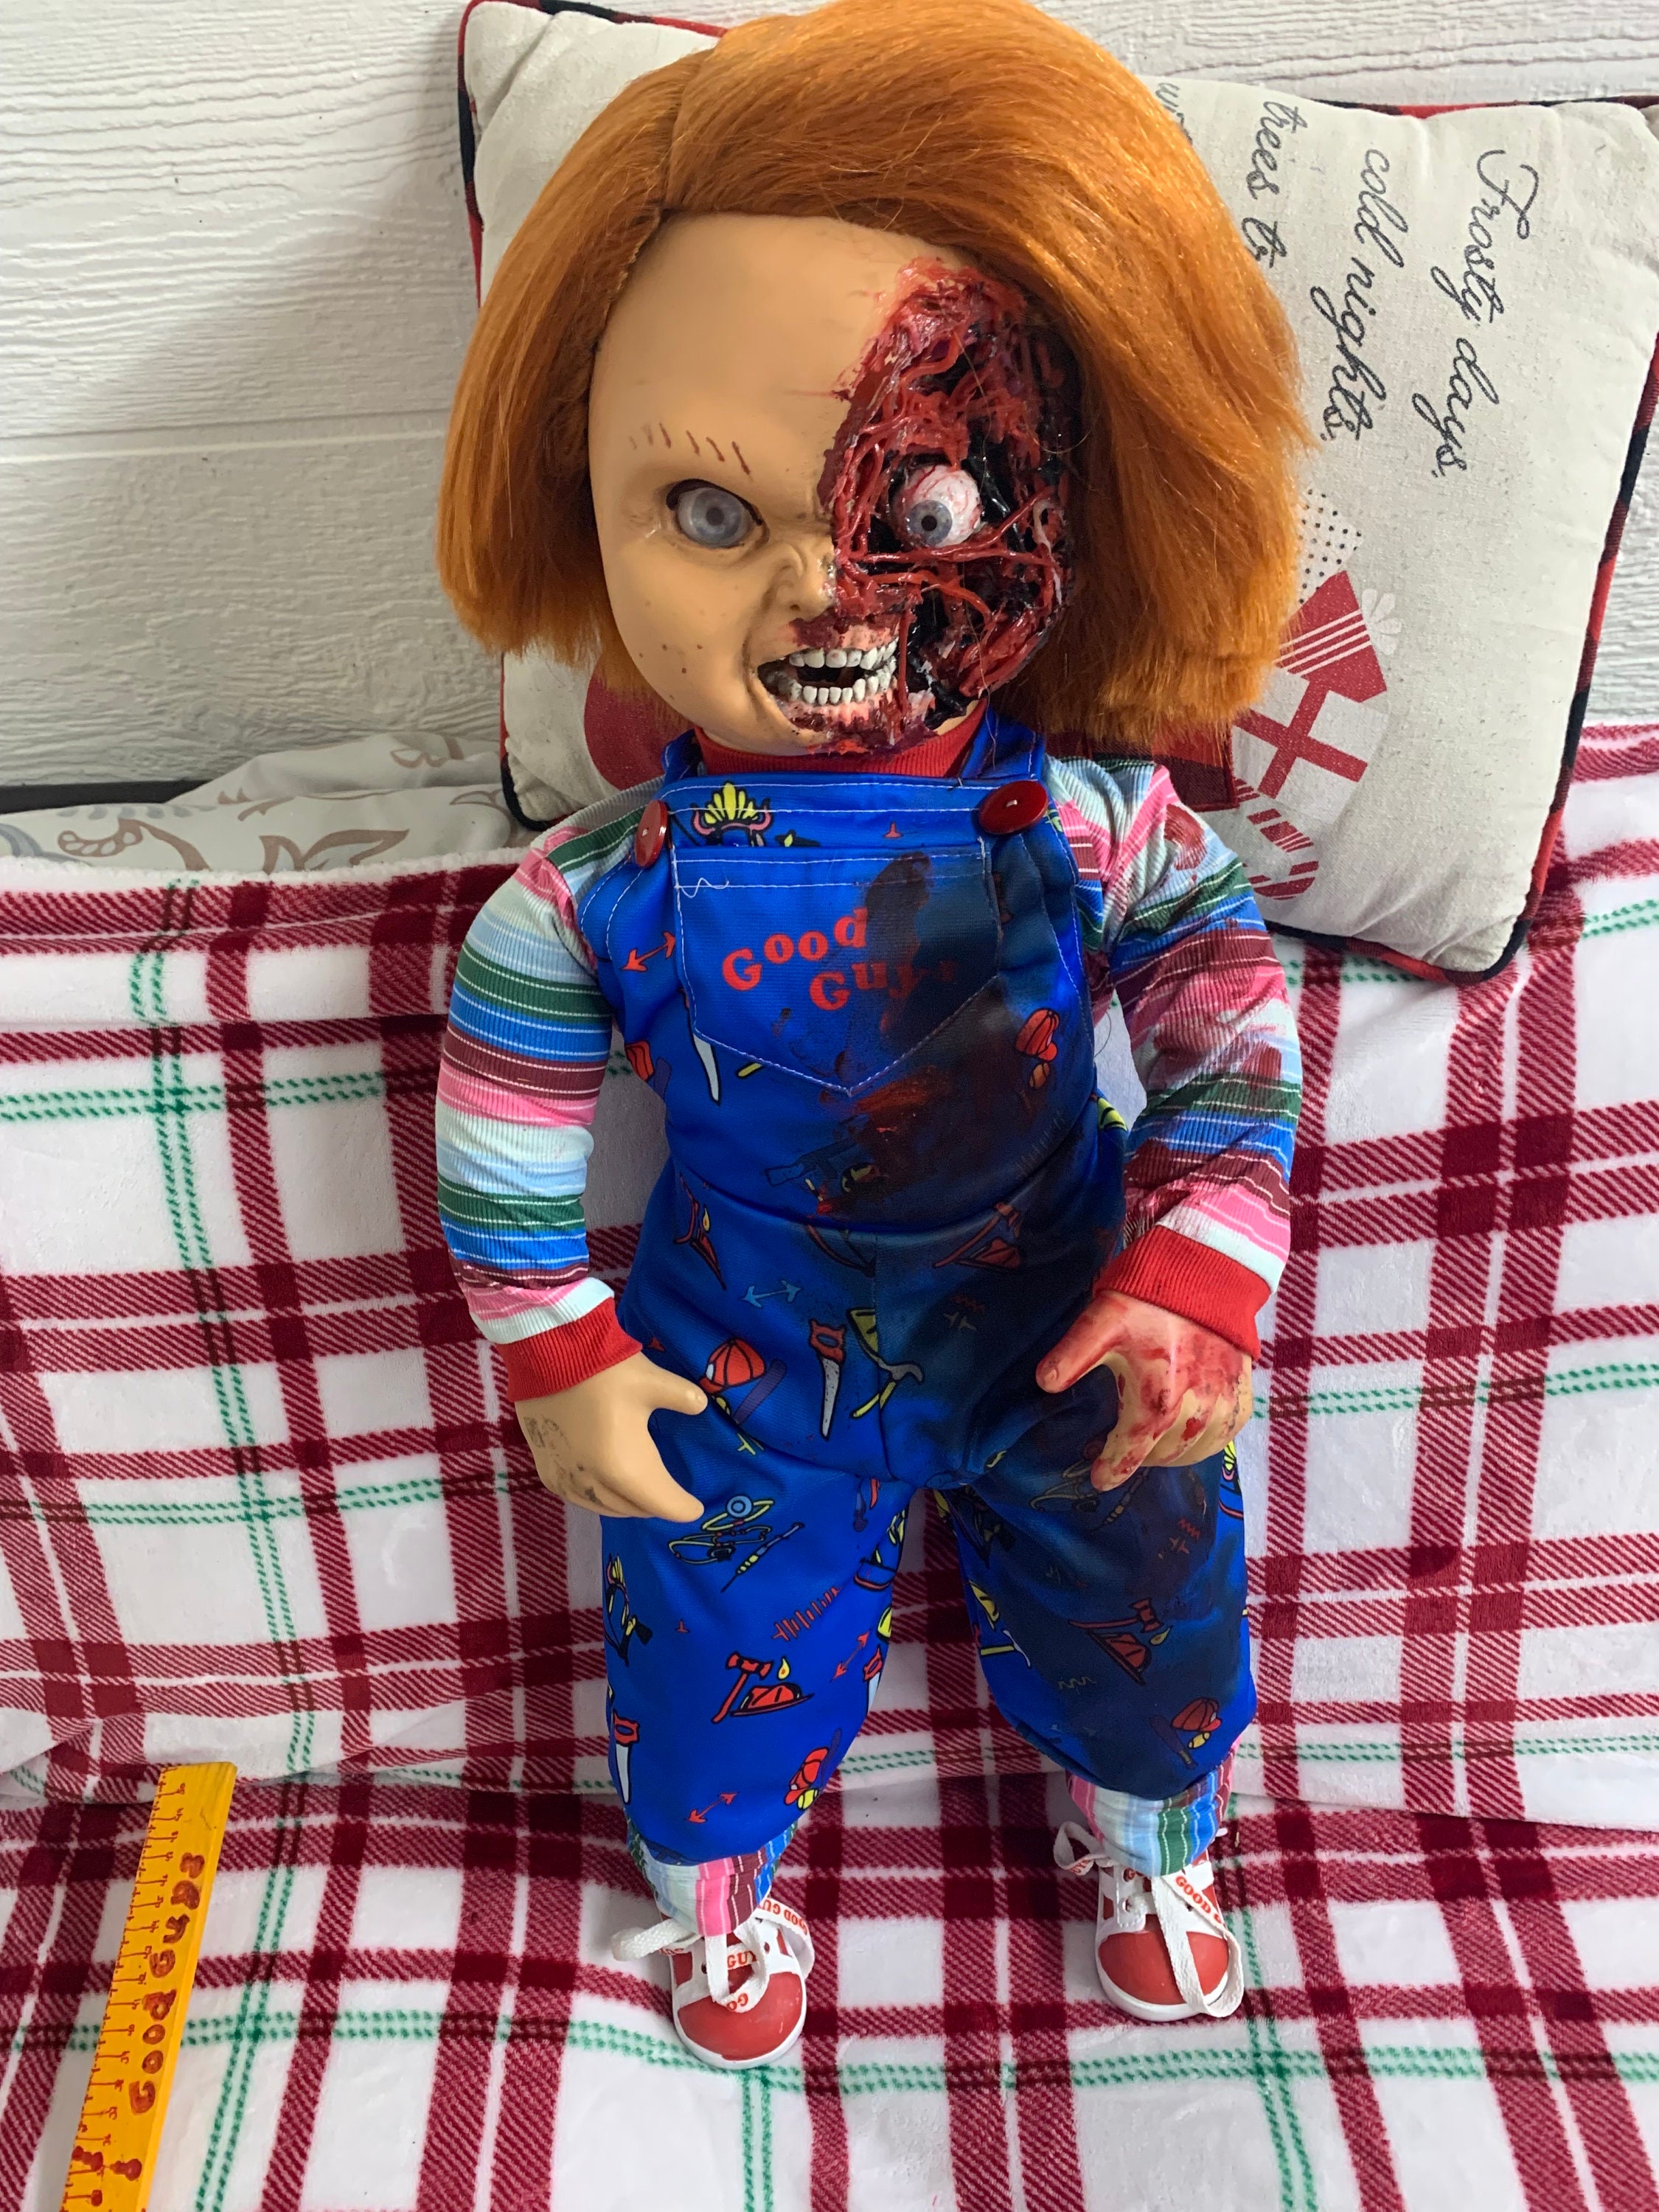 Chucky Doll Childs Play 3 Life Size photo